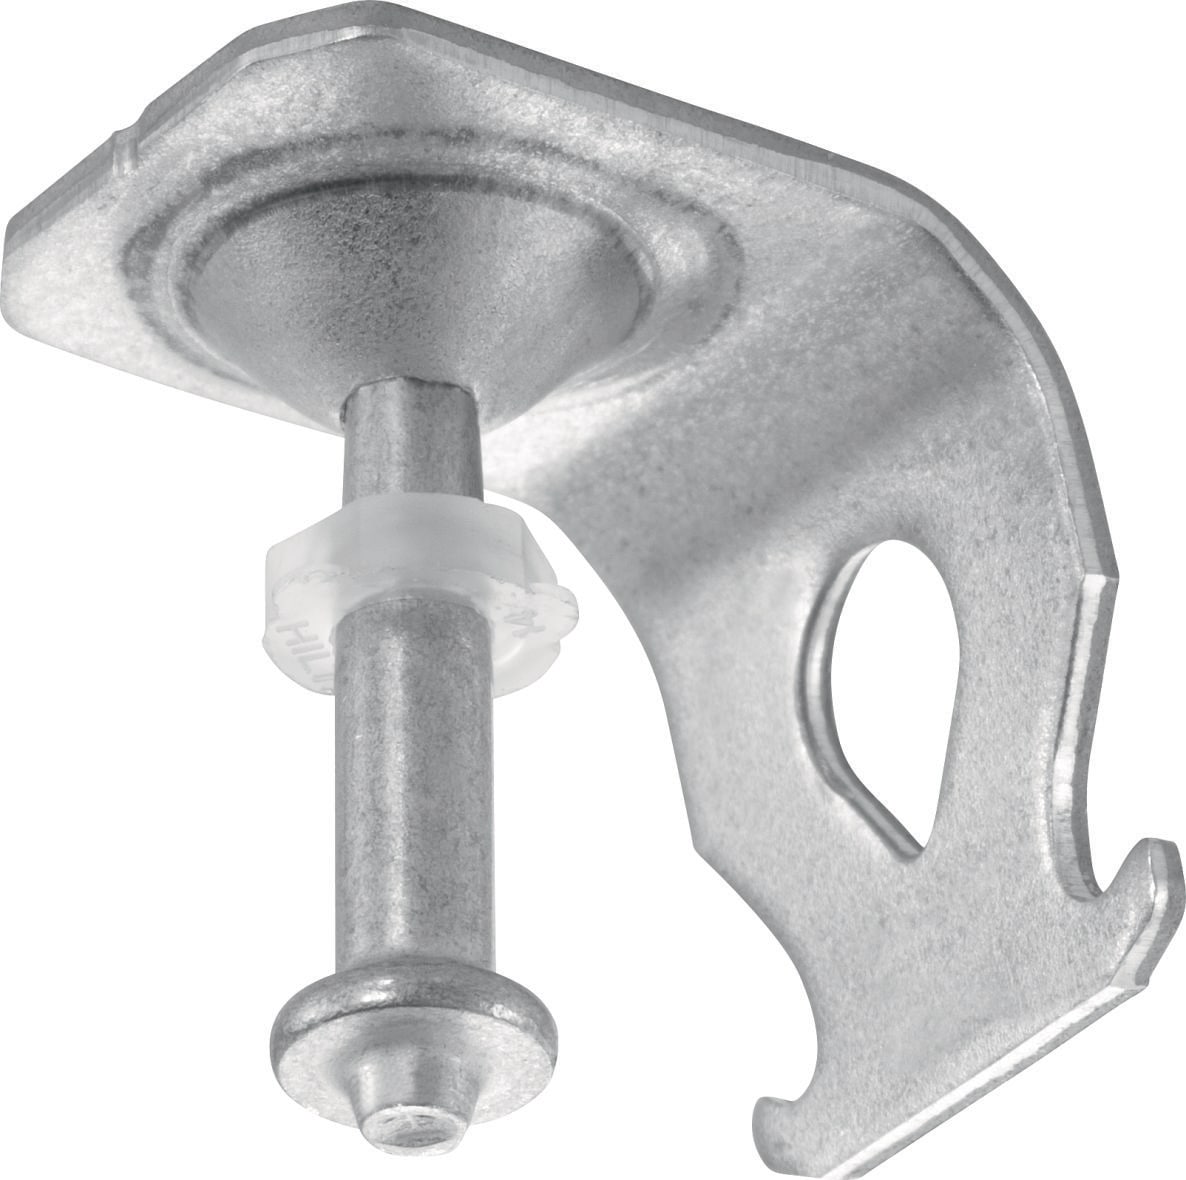 X-CX ALH Ceiling clip with nail - Suspended Ceiling Clips